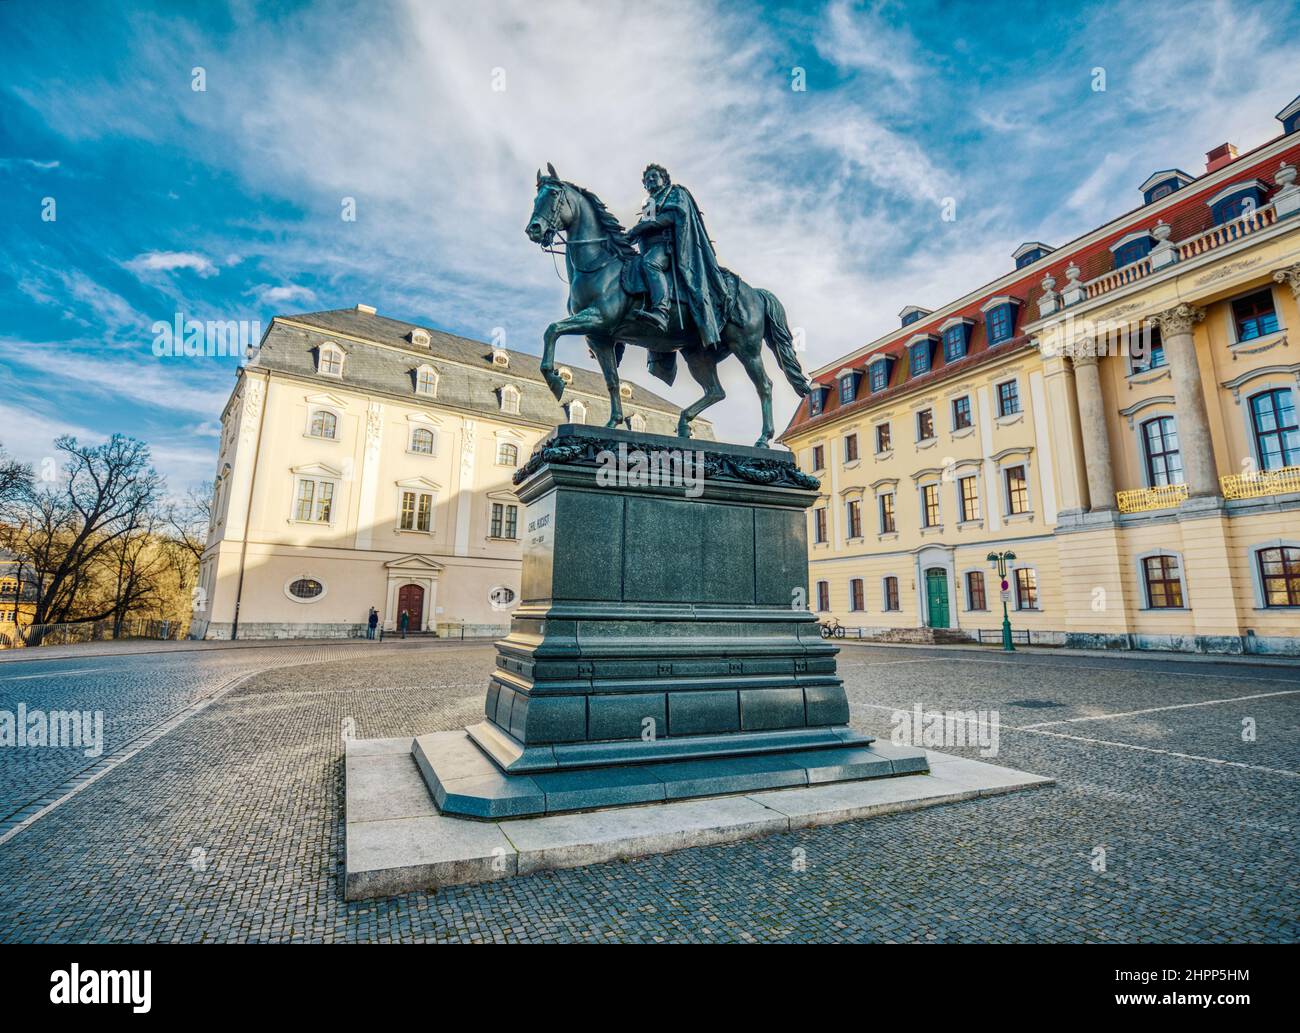 Statue of Karl August, Grand Duke of Saxe-Weimar-Eisenach in Weimar, Germany Stock Photo